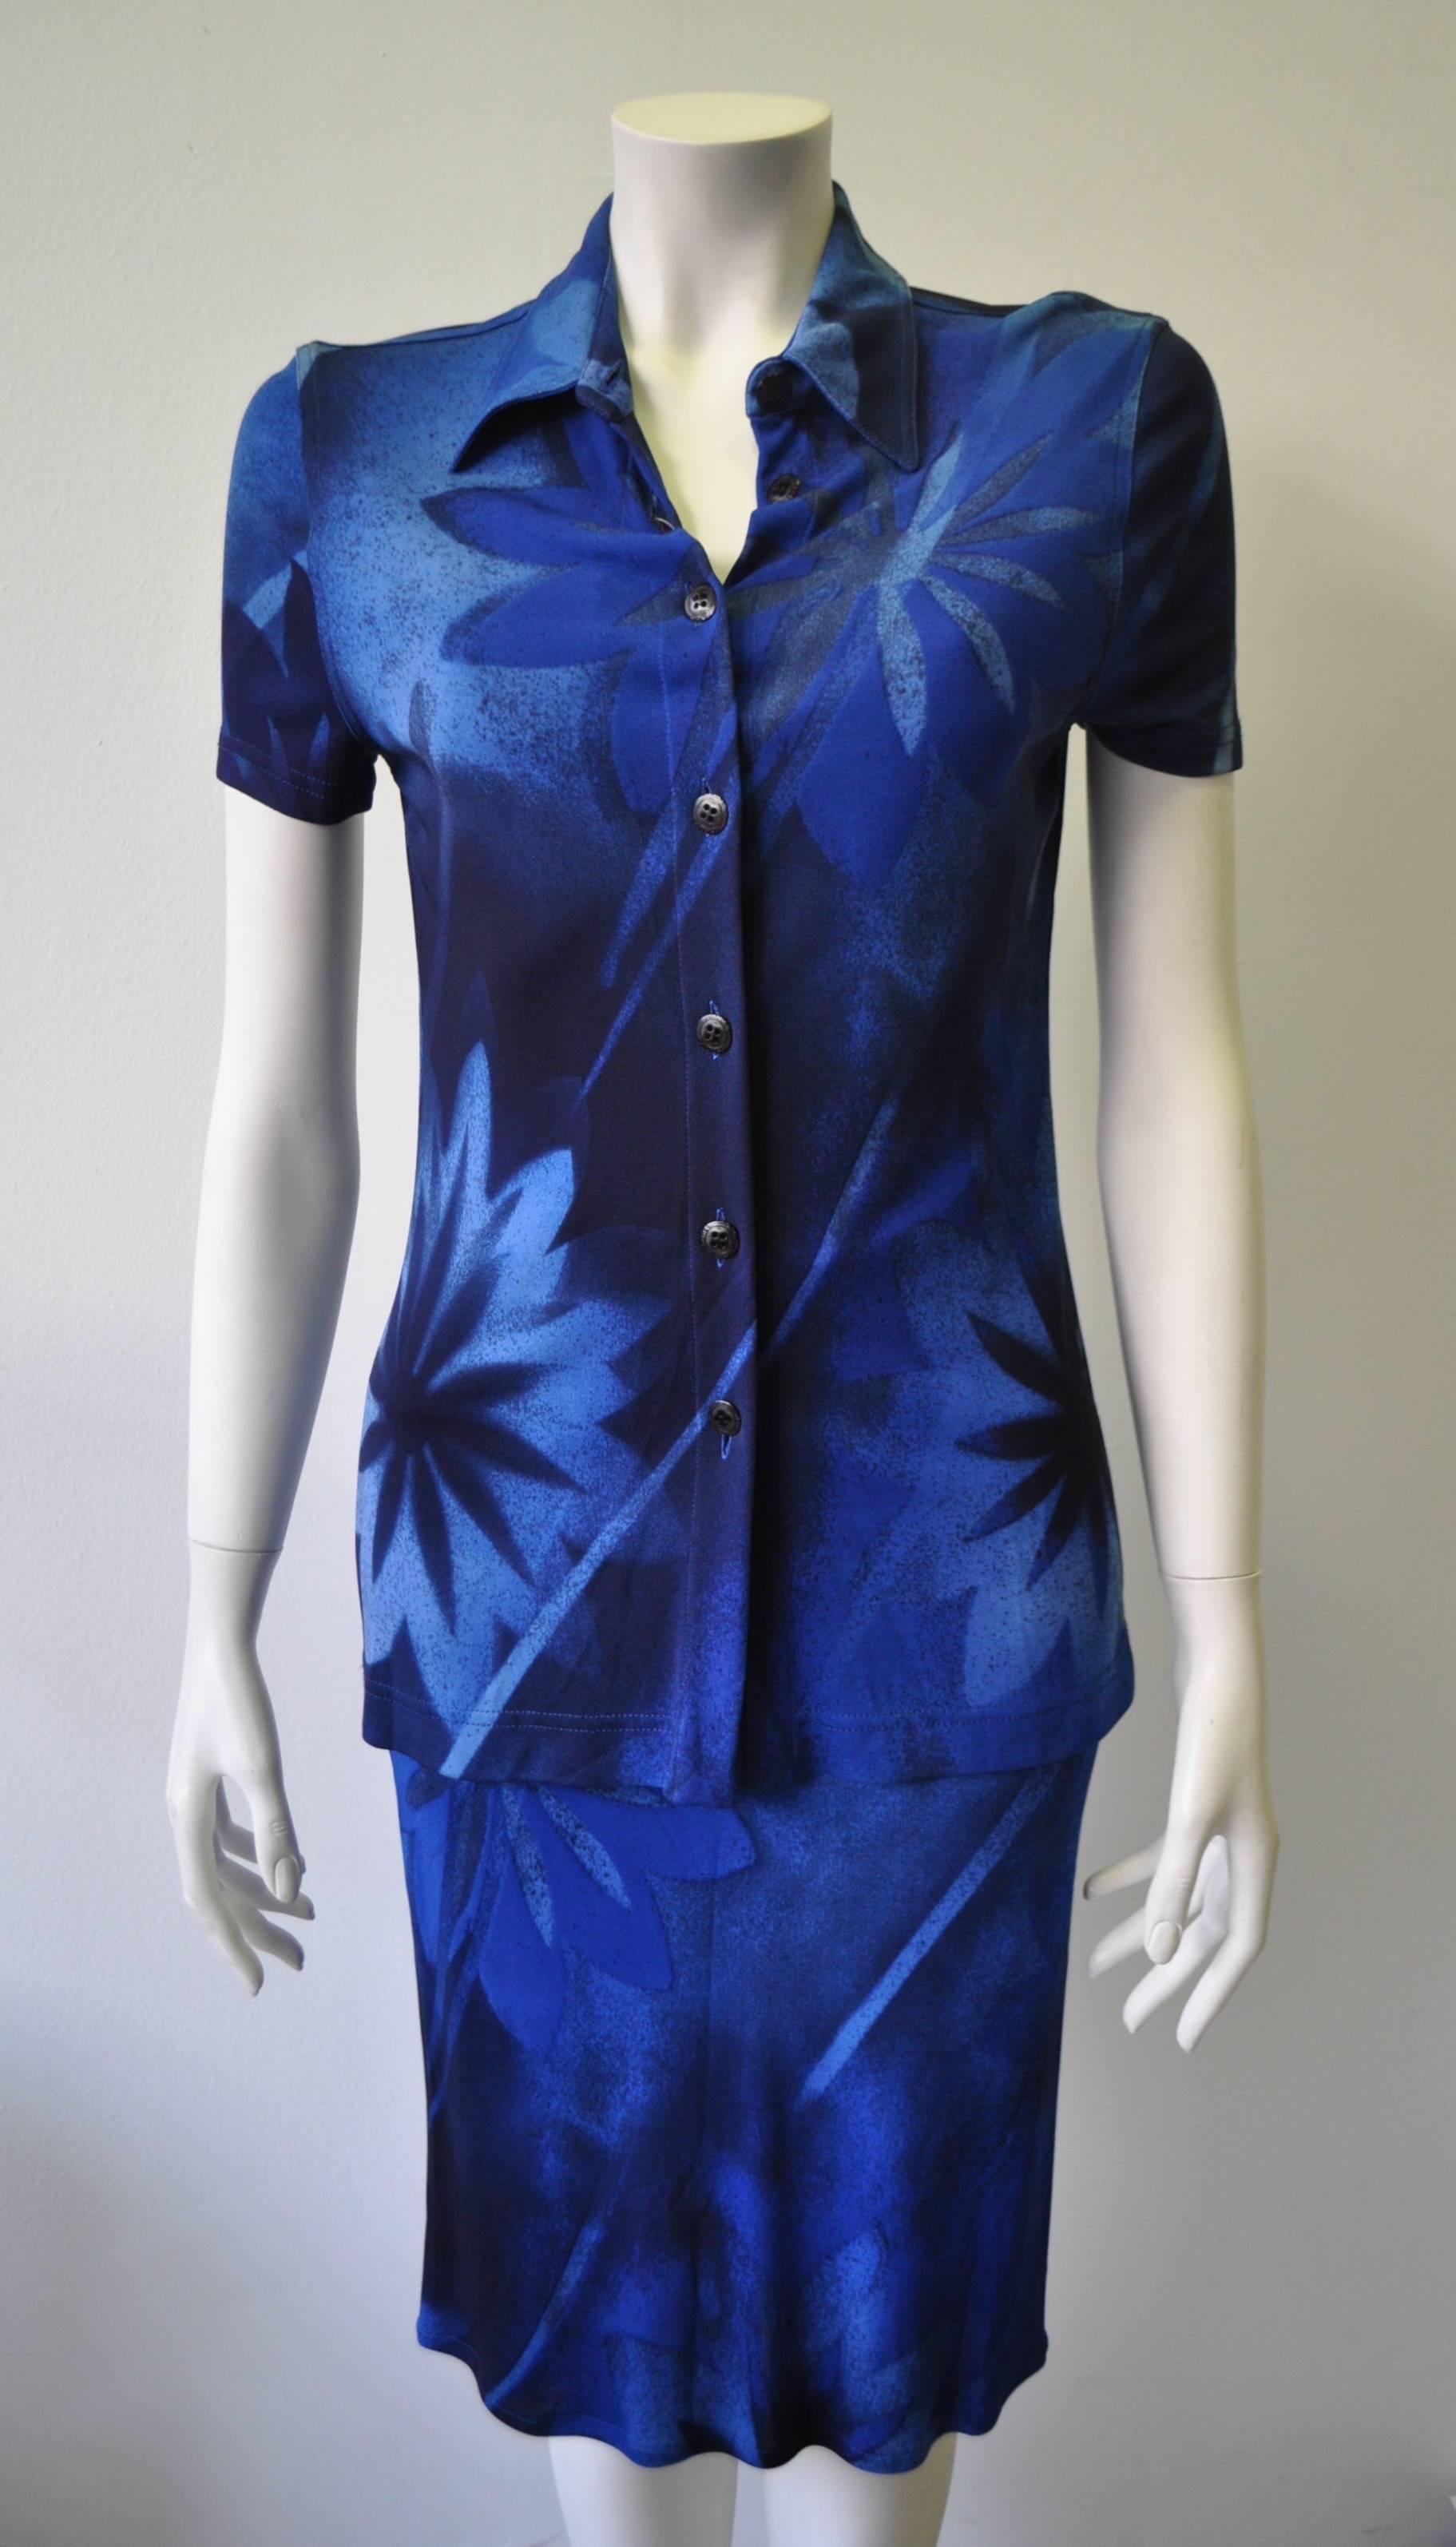 Gianni Versace Istante Deep Blue Floral Short Sleeve Top and Skirt Ensemble